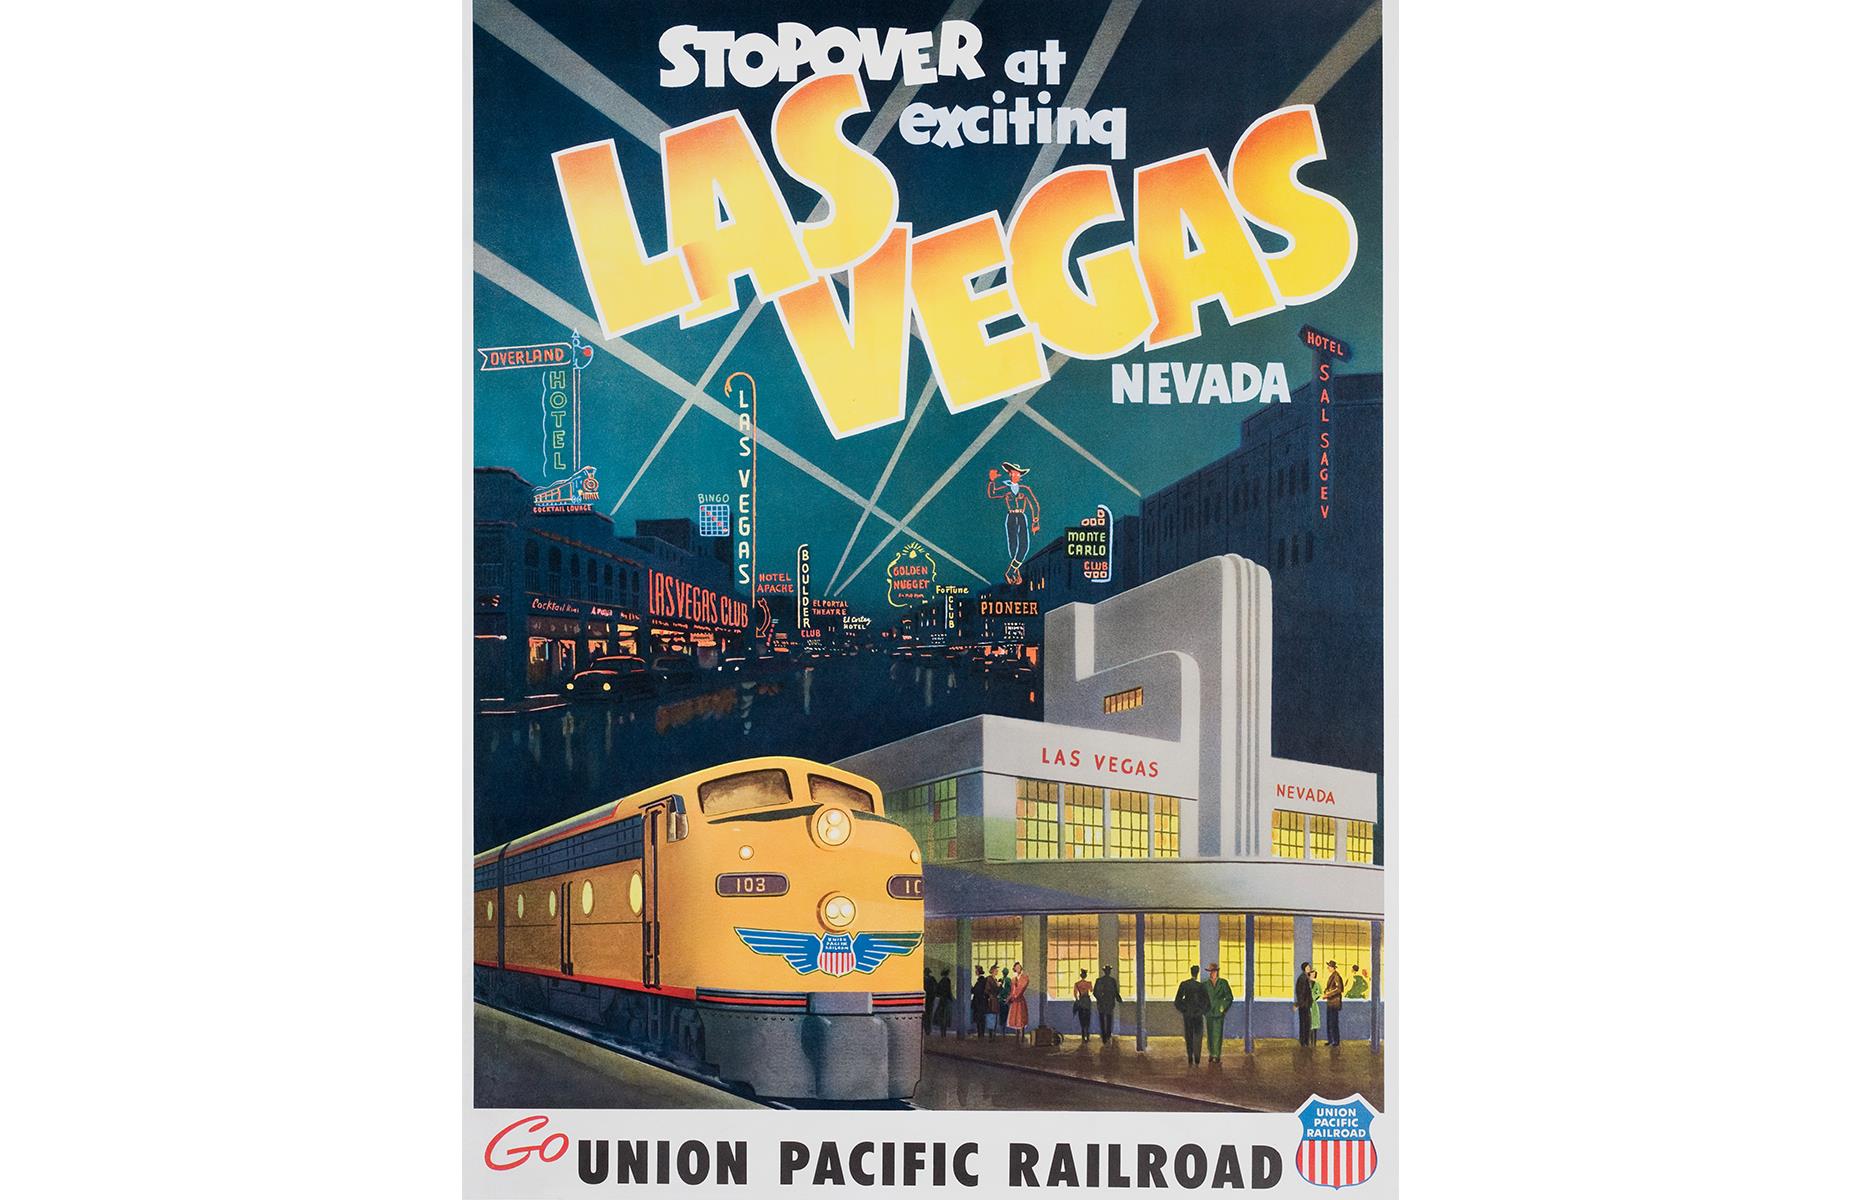 Sin City is another Union Pacific destination. In this railroad ad, Las Vegas calls with its glittering neon signs rising from lavish hotels and casinos. The smart yellow Union Pacific train is a sight in itself too.